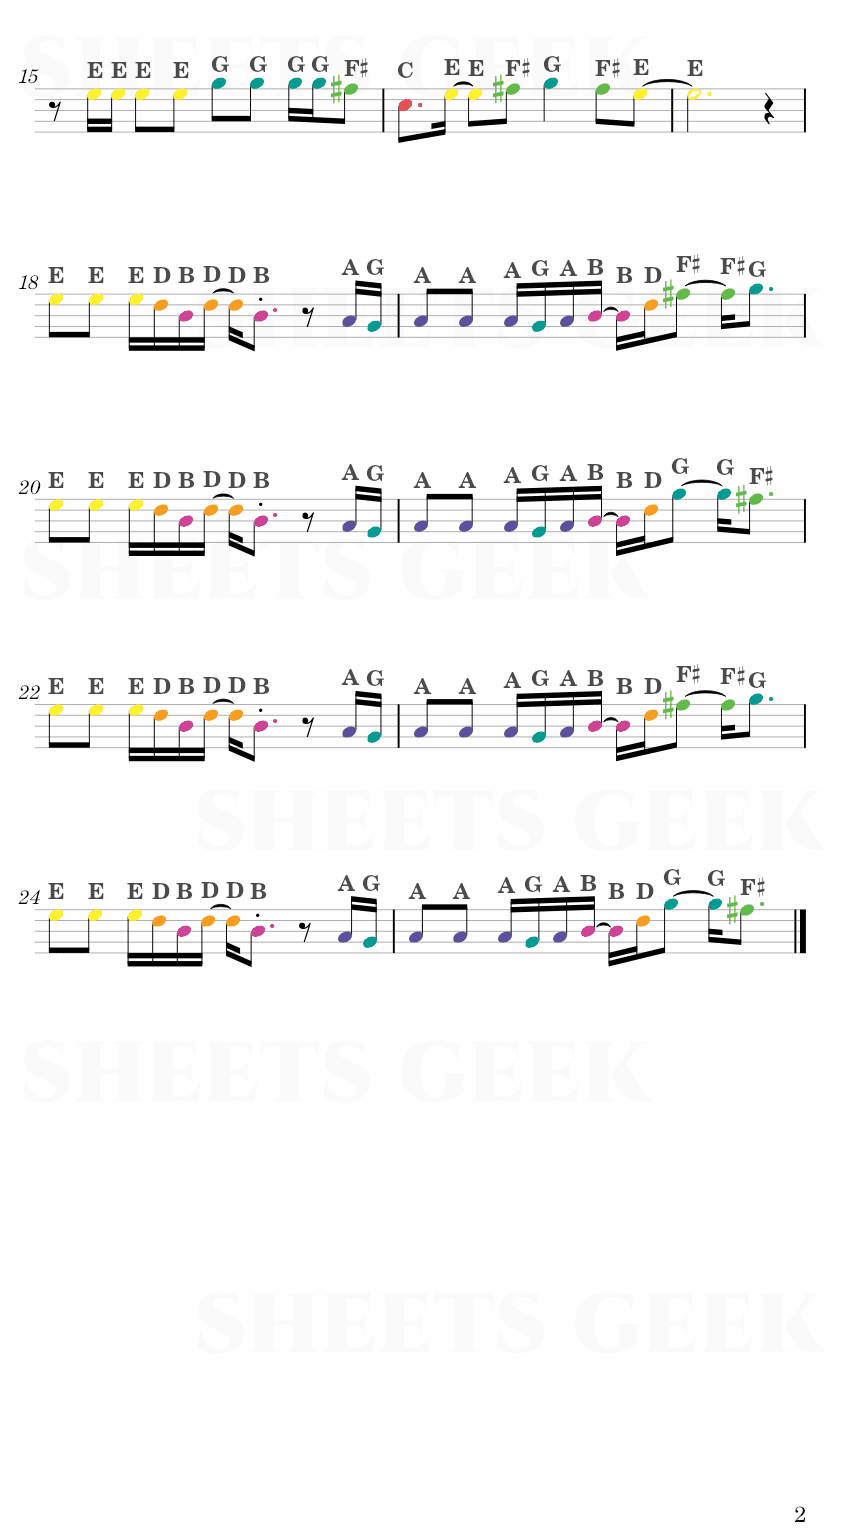 Playing With Fire - BLACKPINK Easy Sheet Music Free for piano, keyboard, flute, violin, sax, cello page 2